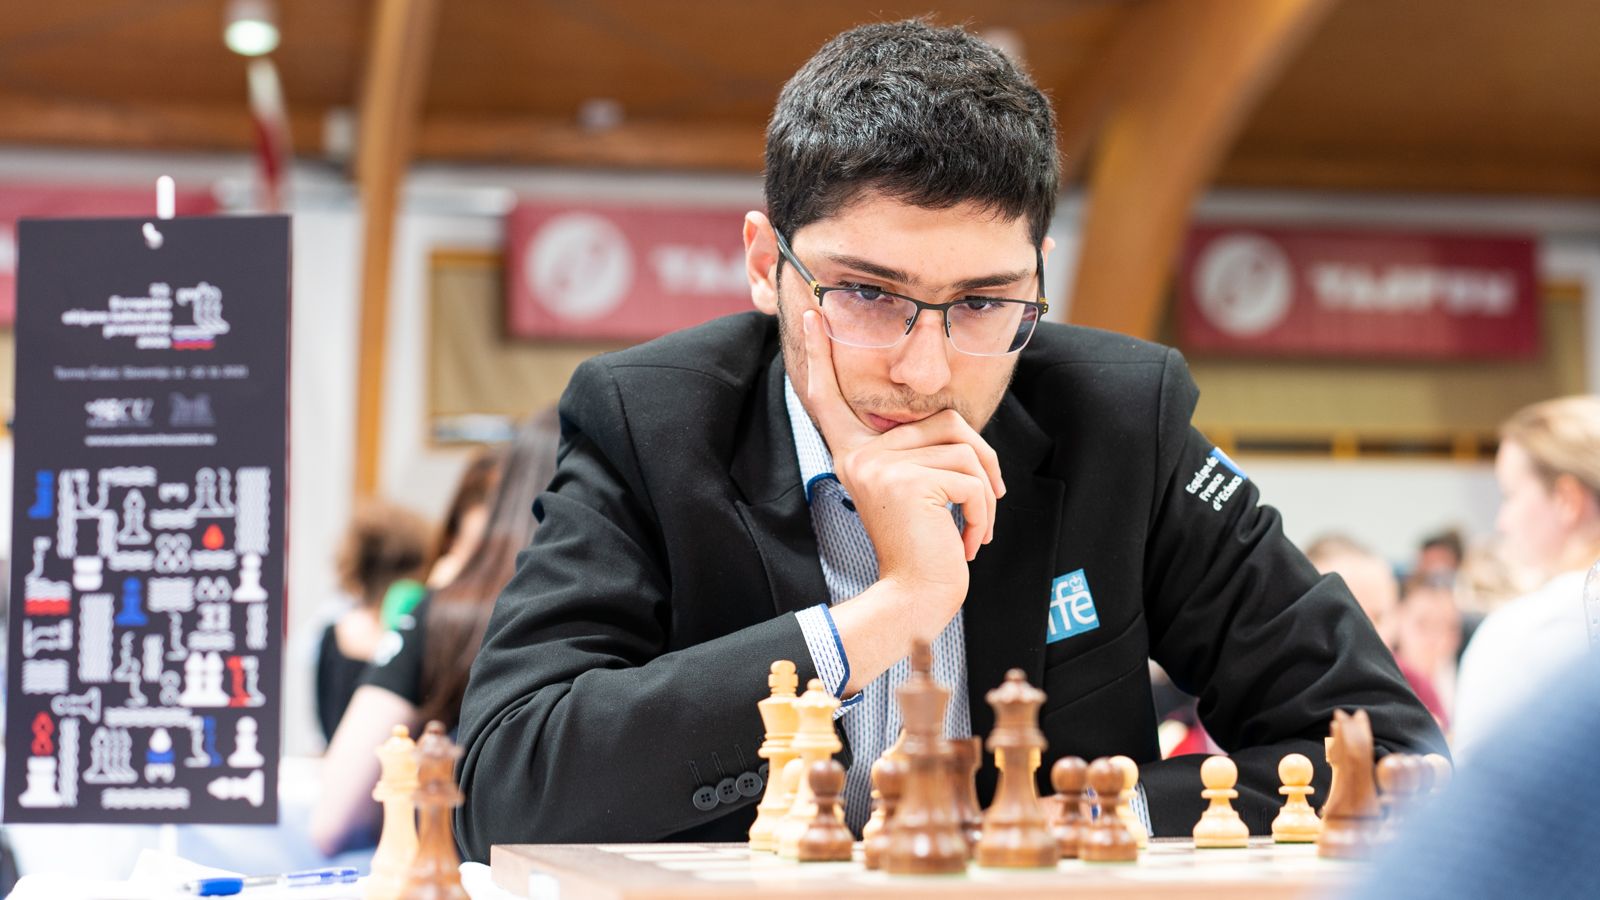 Are chess prodigy Firouzja Alireza's chess accomplishments, at the age of  16, more impressive than Magnus Carlsen's at the same age? - Quora